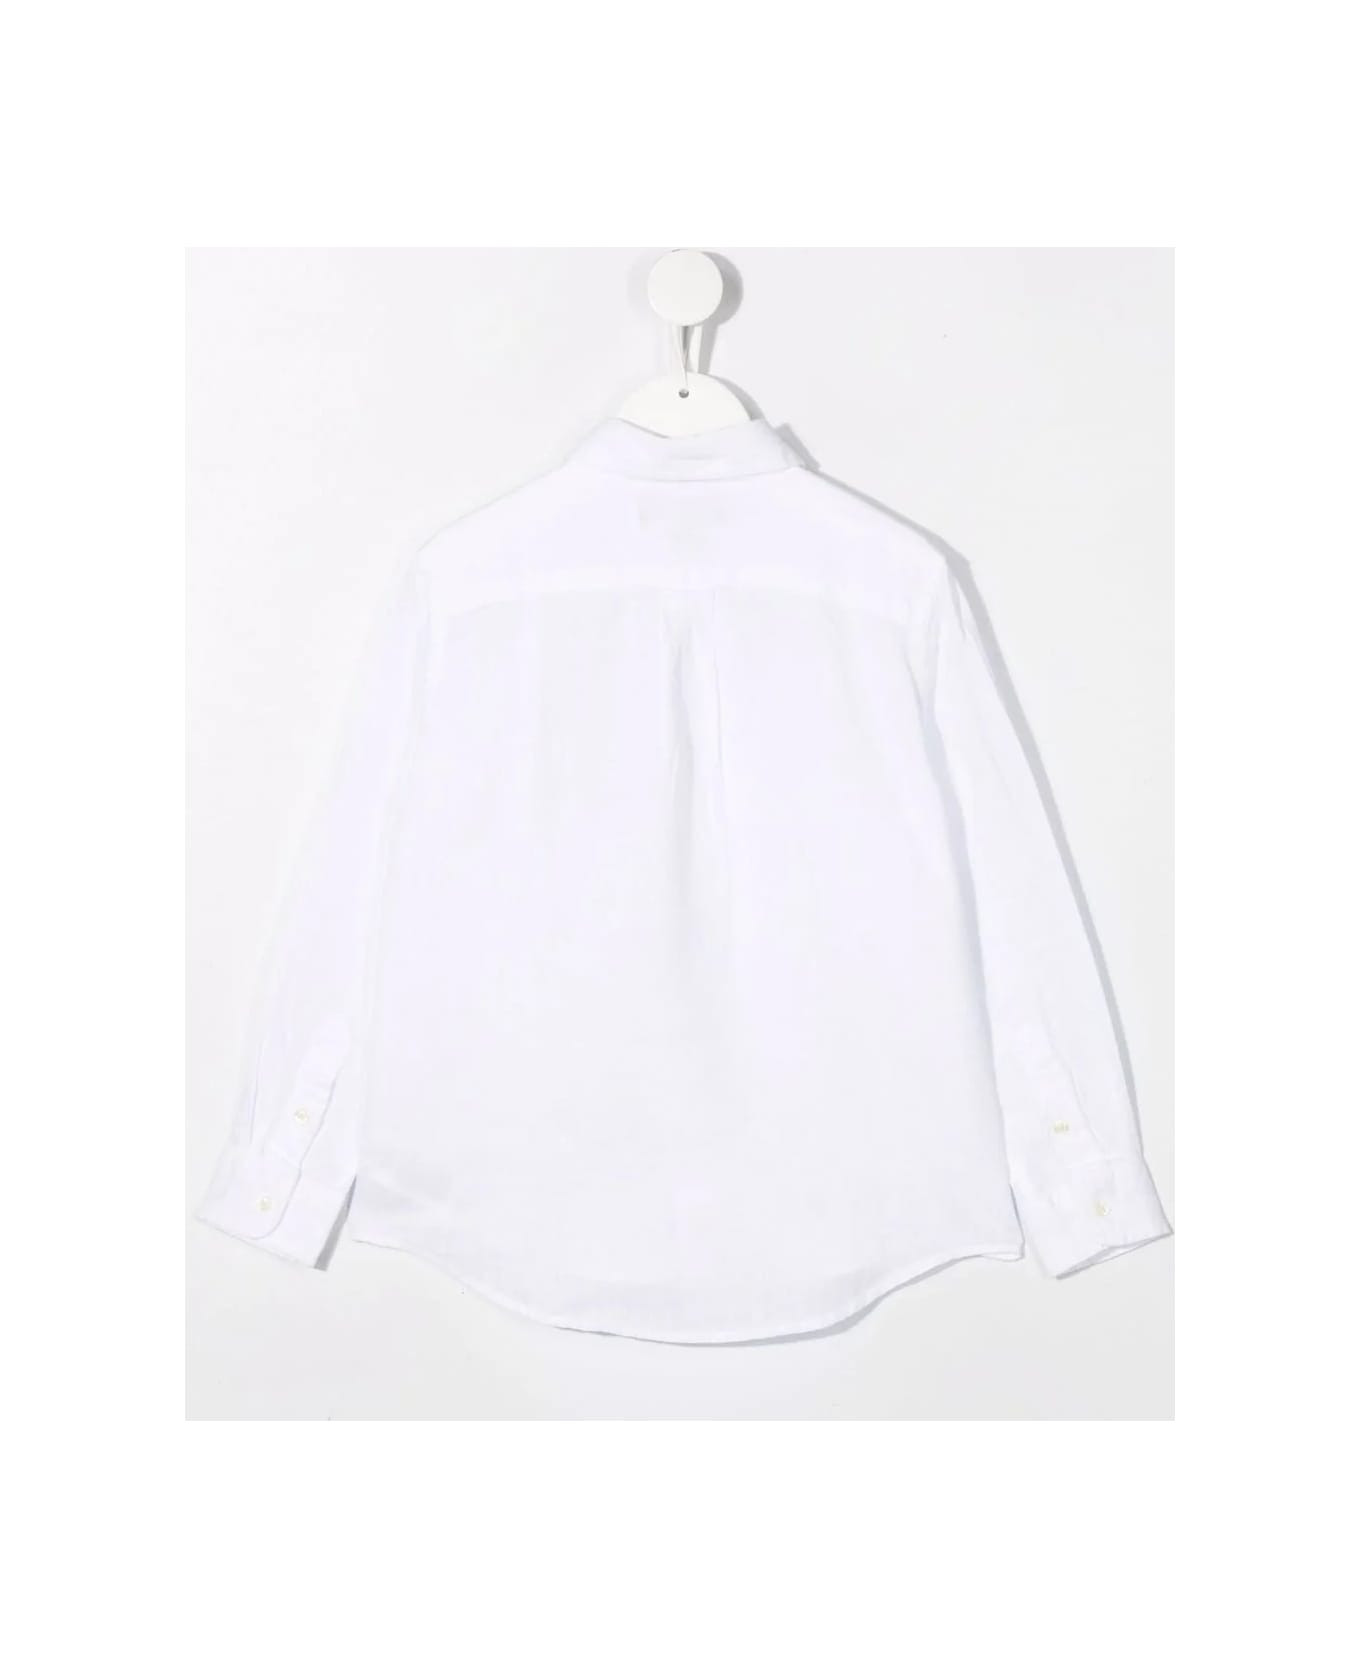 Ralph Lauren White Linen Shirt With Embroidered Pony - White